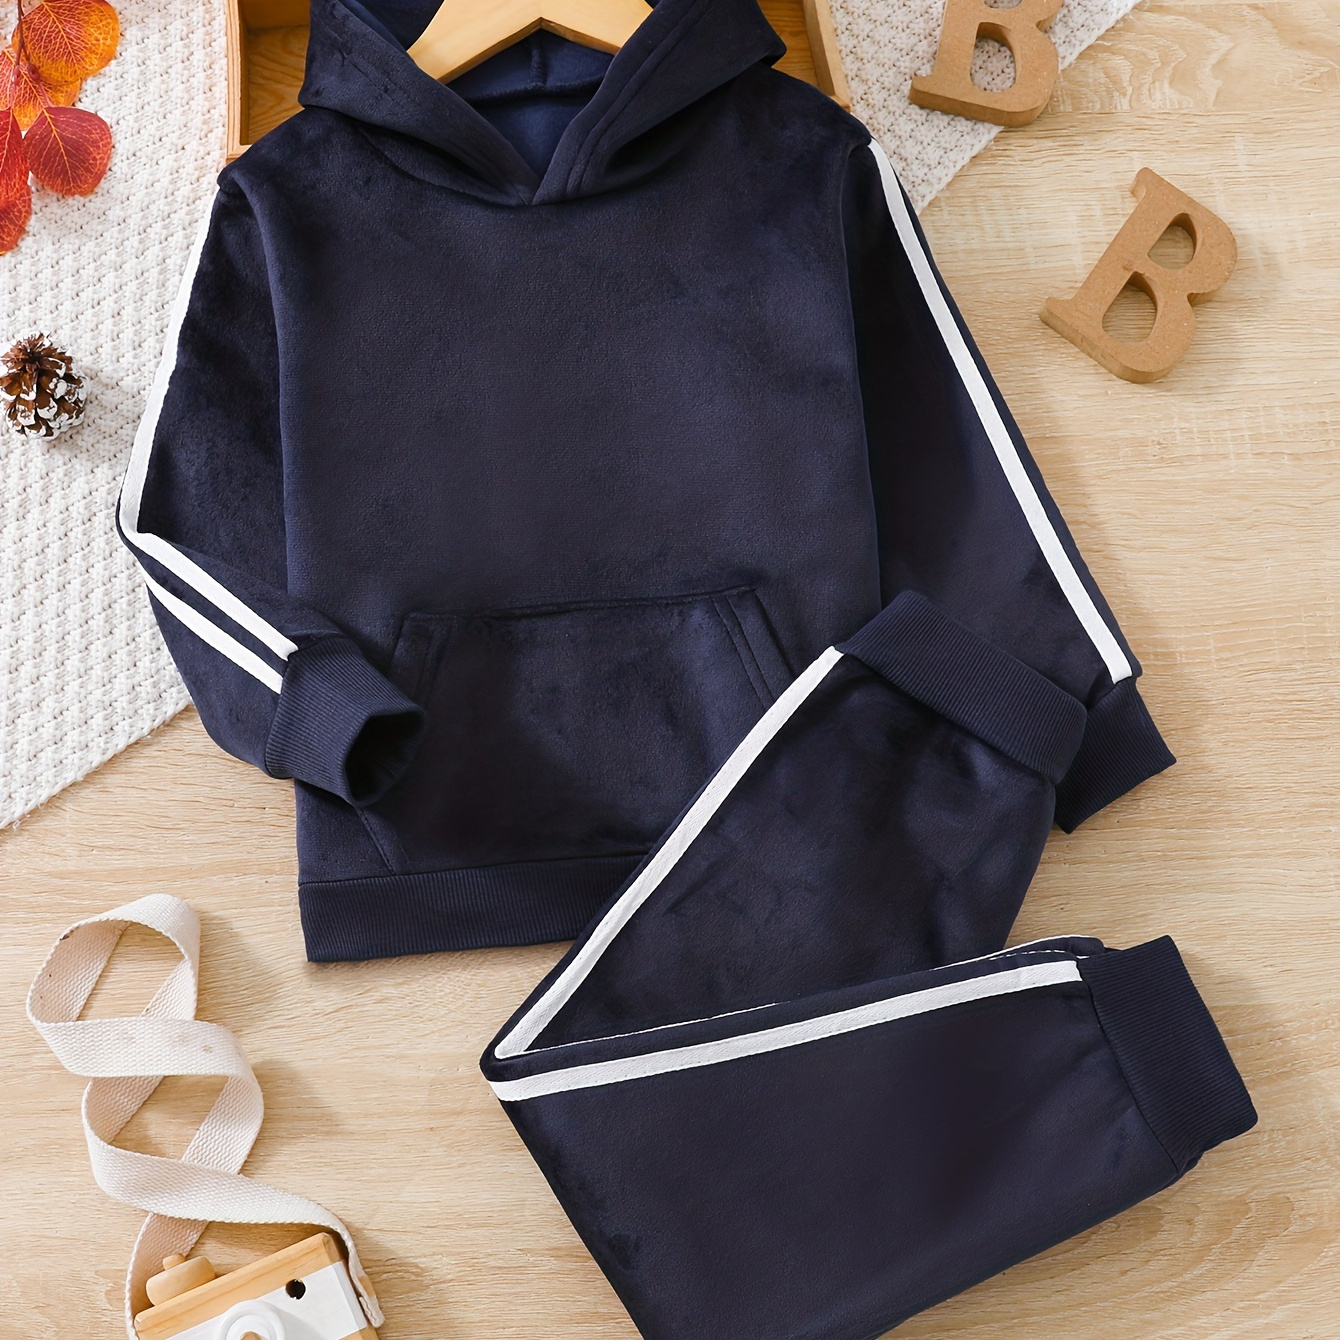 

2pcs Boy's Velvet Sporty Style Outfit, Striped Hoodie & Sweatpants Set, Casual Long Sleeve Top, Kid's Clothes For Spring Fall Winter, As Christmas Gift